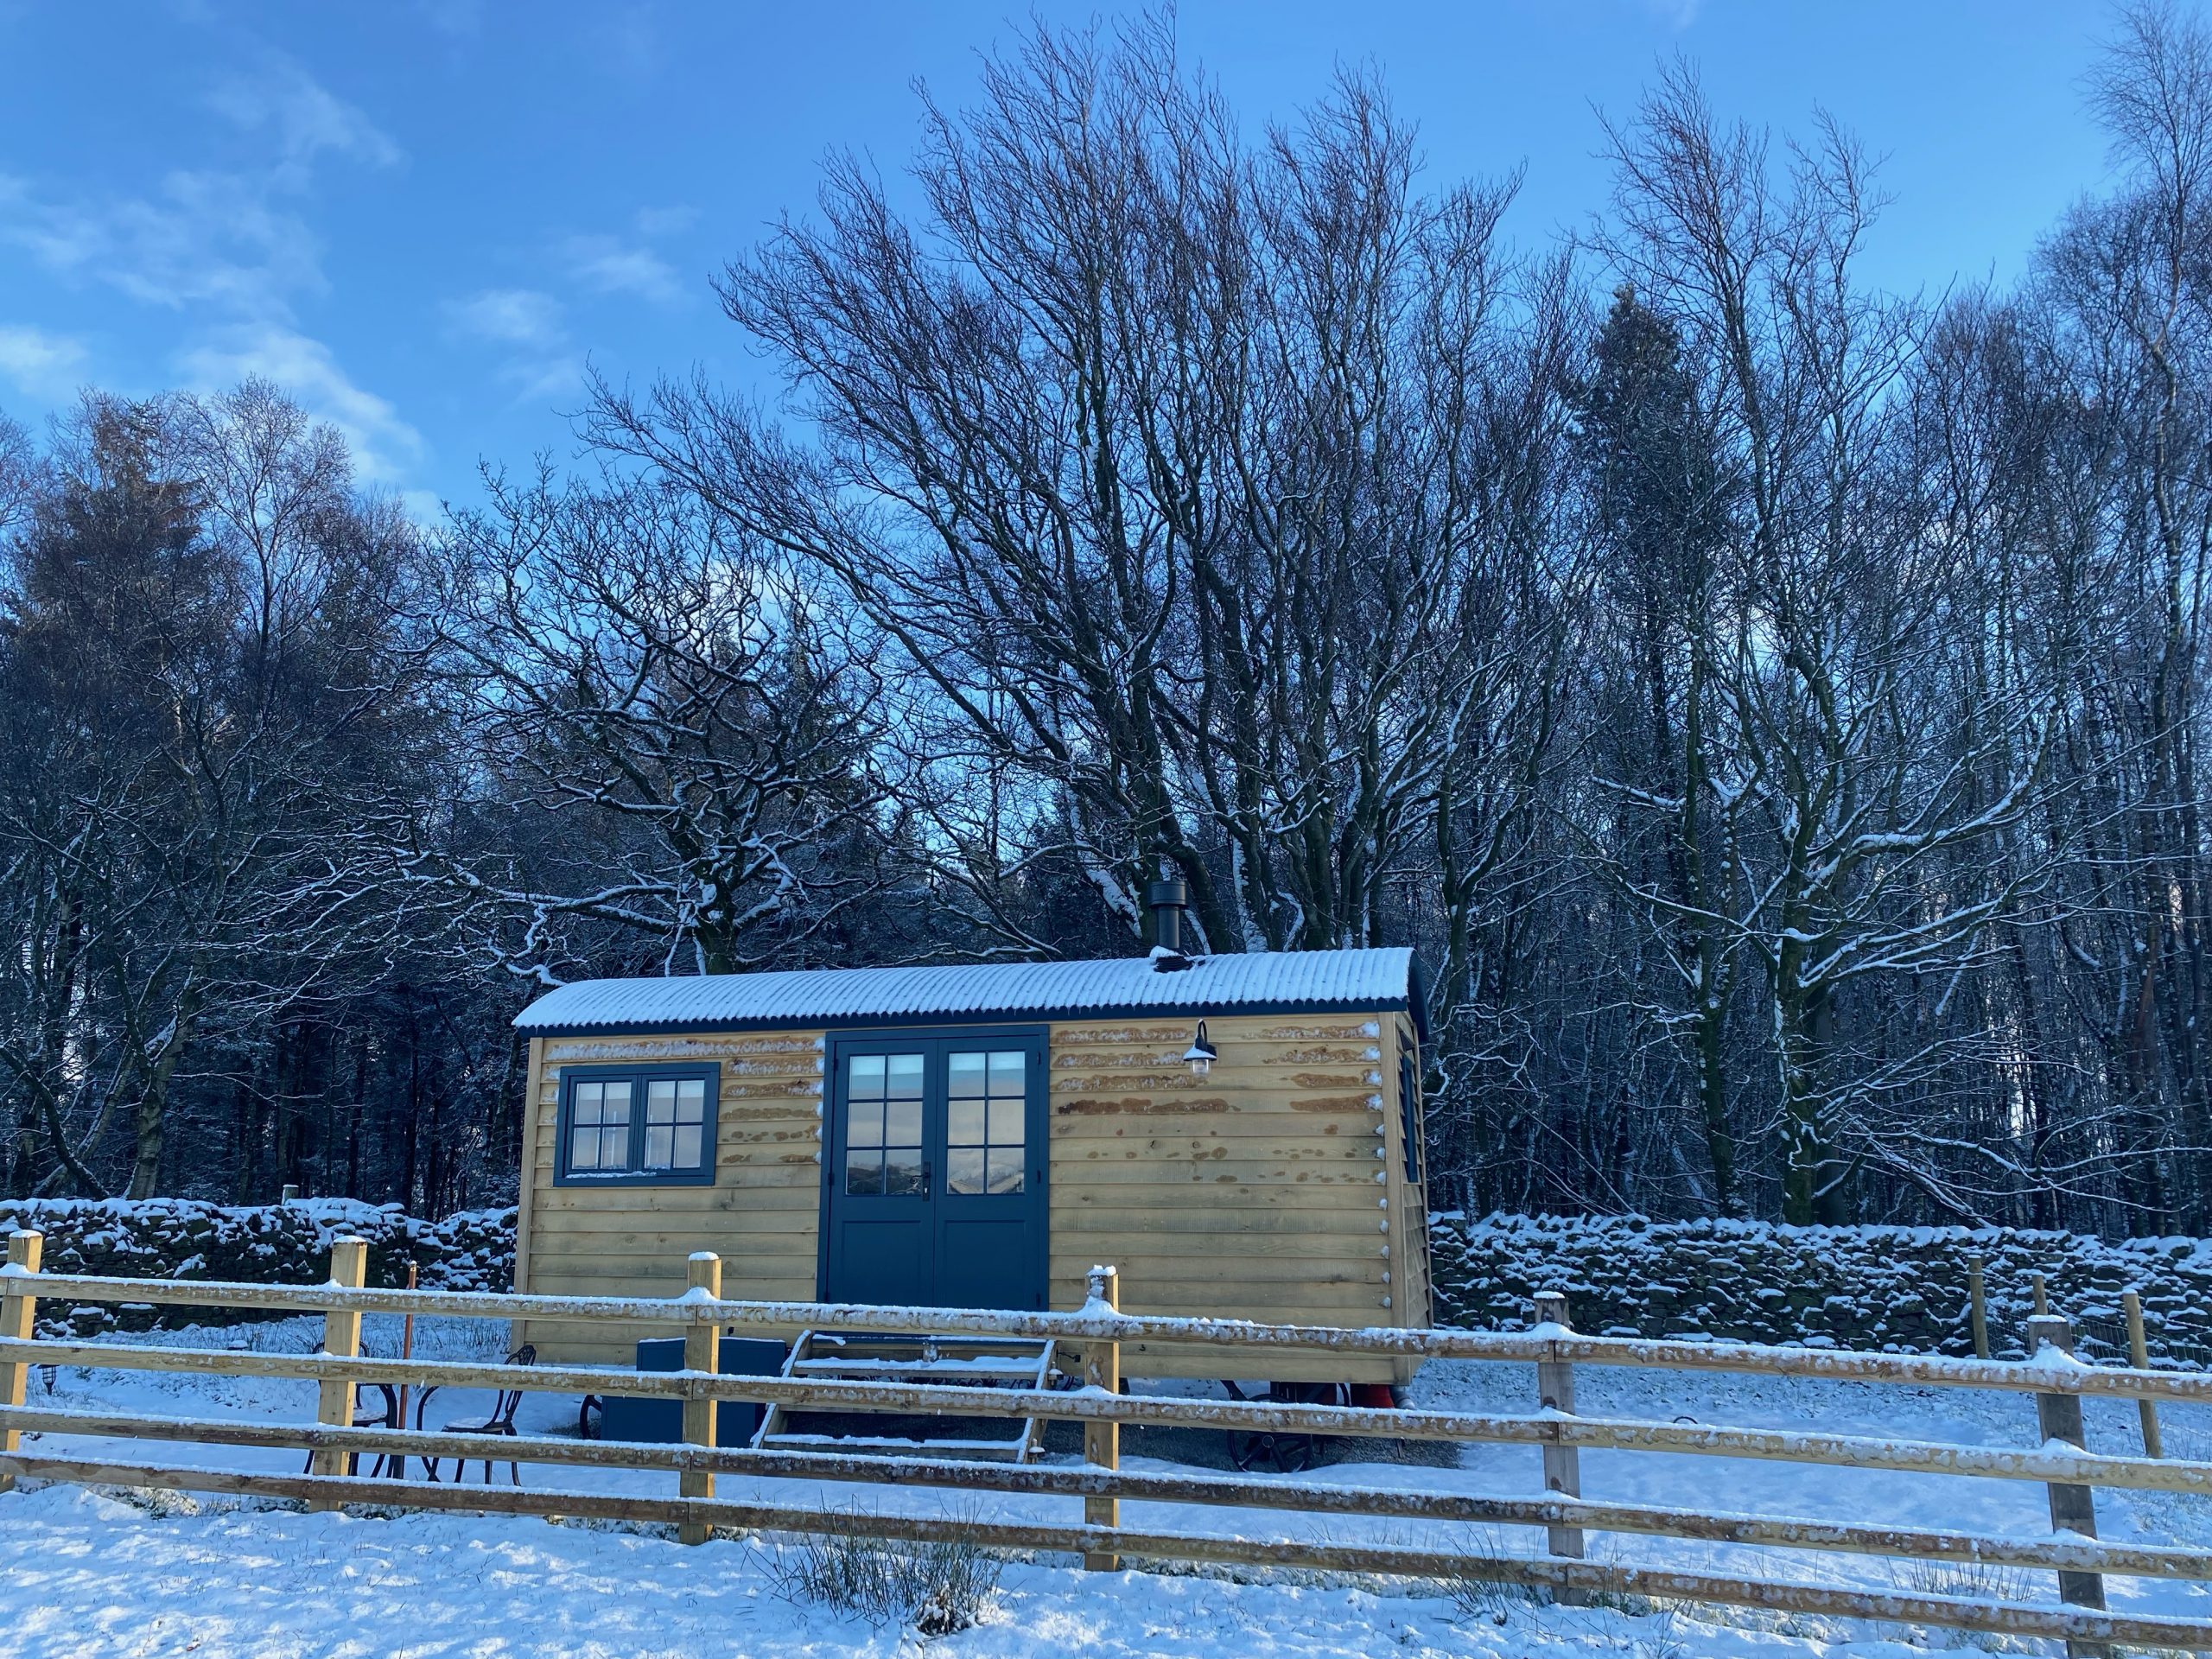 The Dalesbred Hut at Hollow Gill Huts in Winter